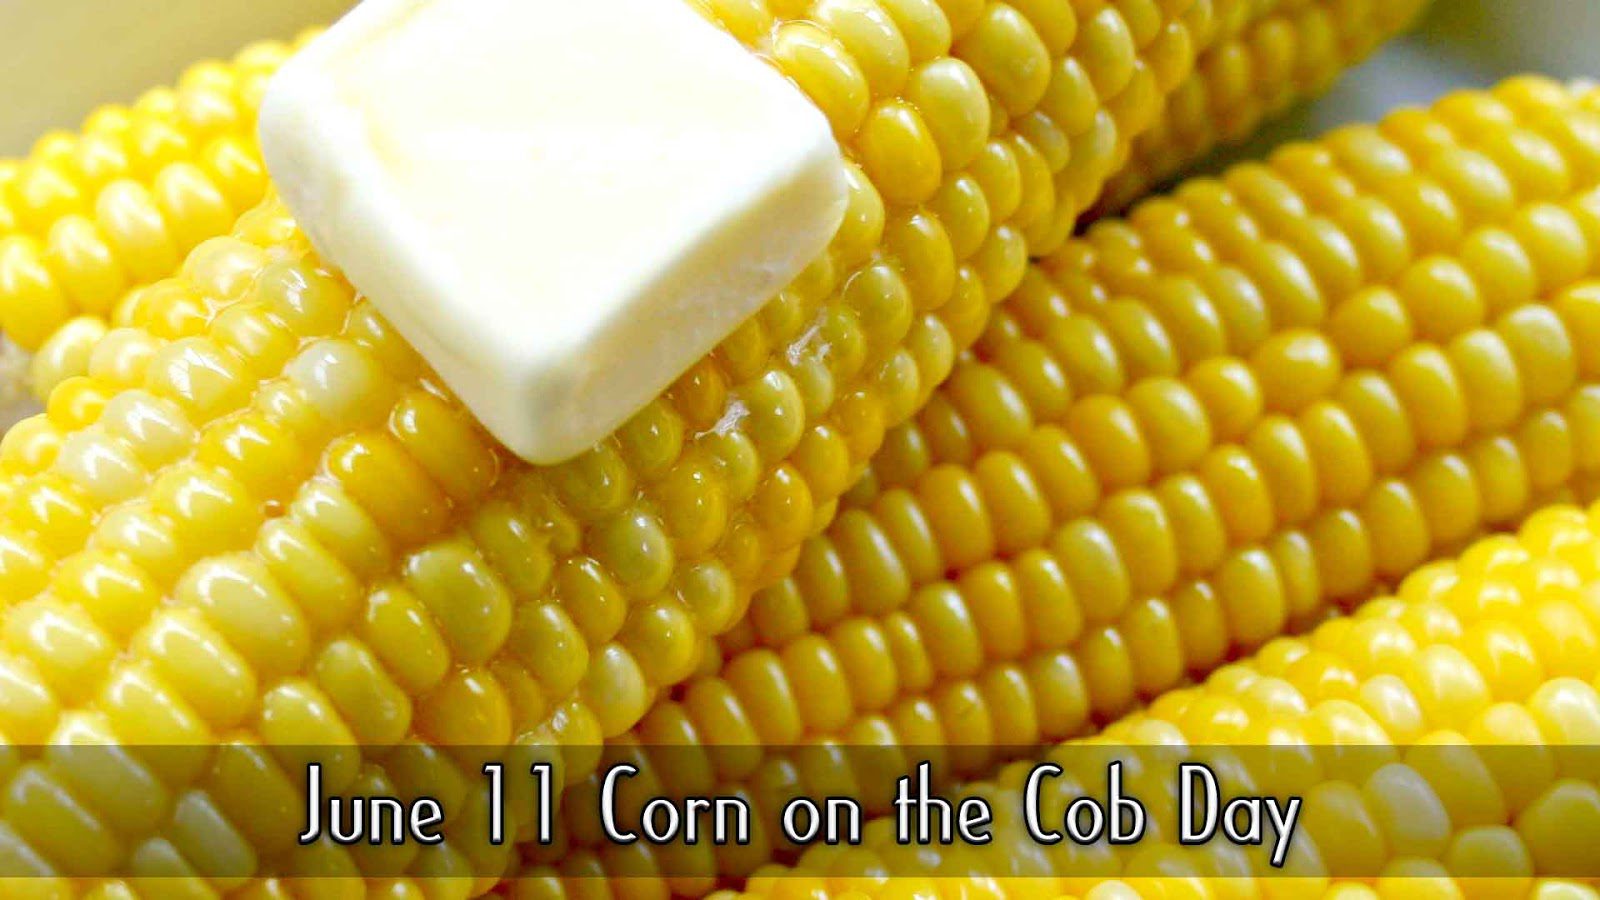 When is Corn on the Cob Day This Year 